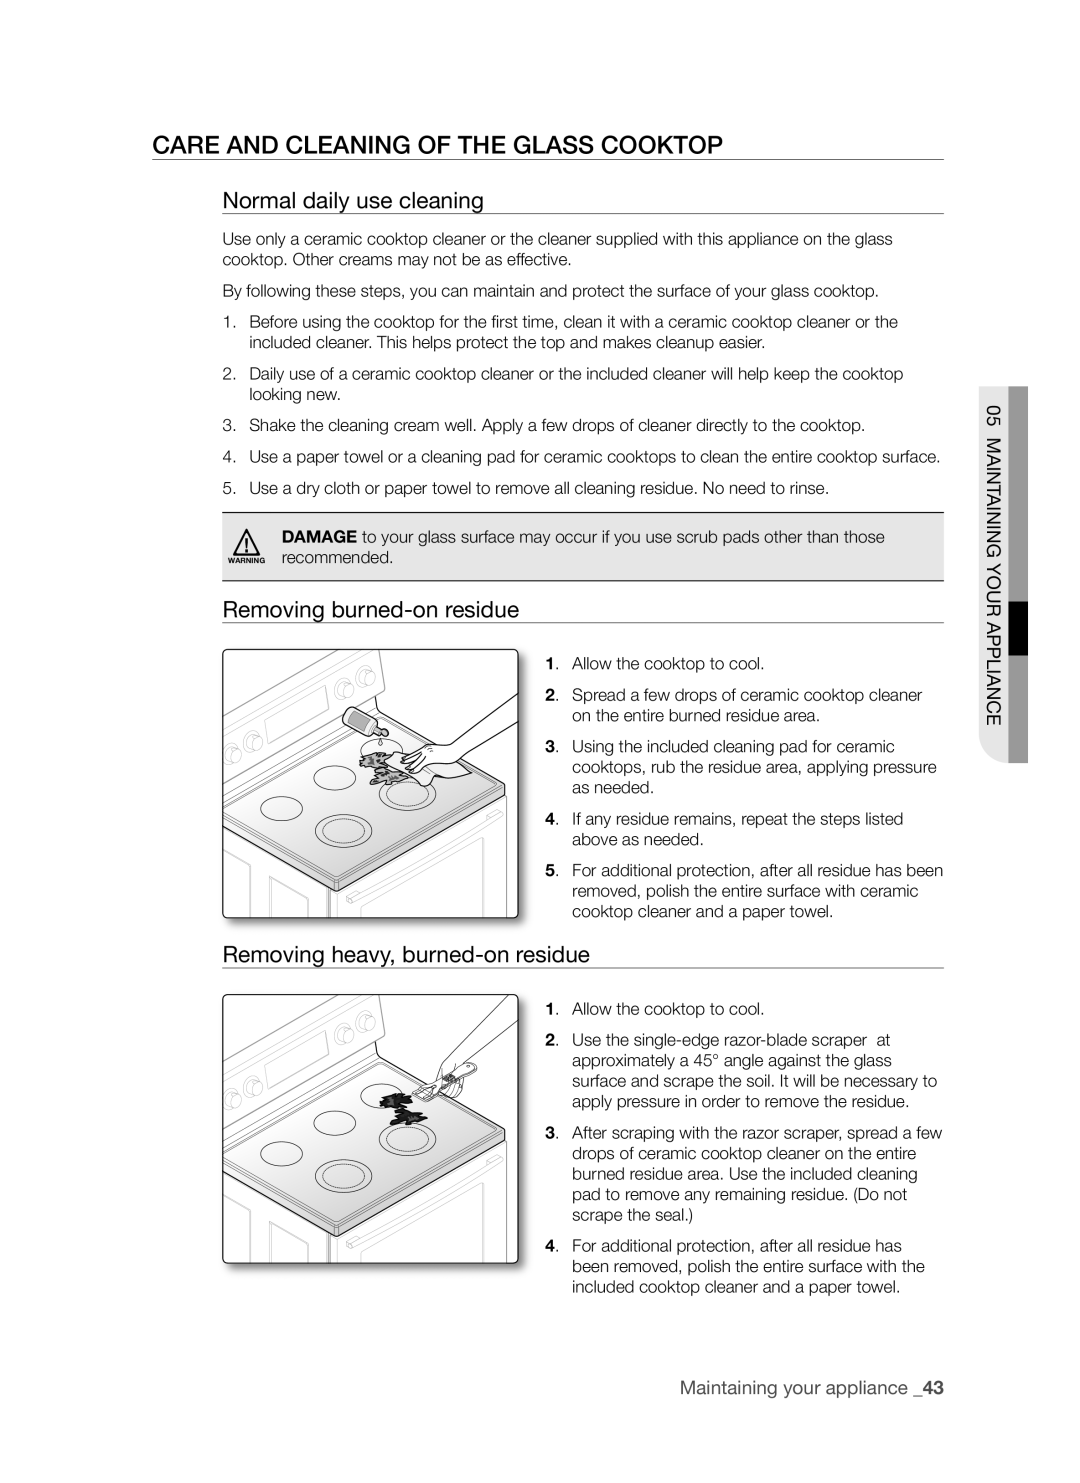 Samsung FTQ352IWUW user manual Care And Cleaning Of The Glass Cooktop, Normal daily use cleaning, Removing burned-onresidue 